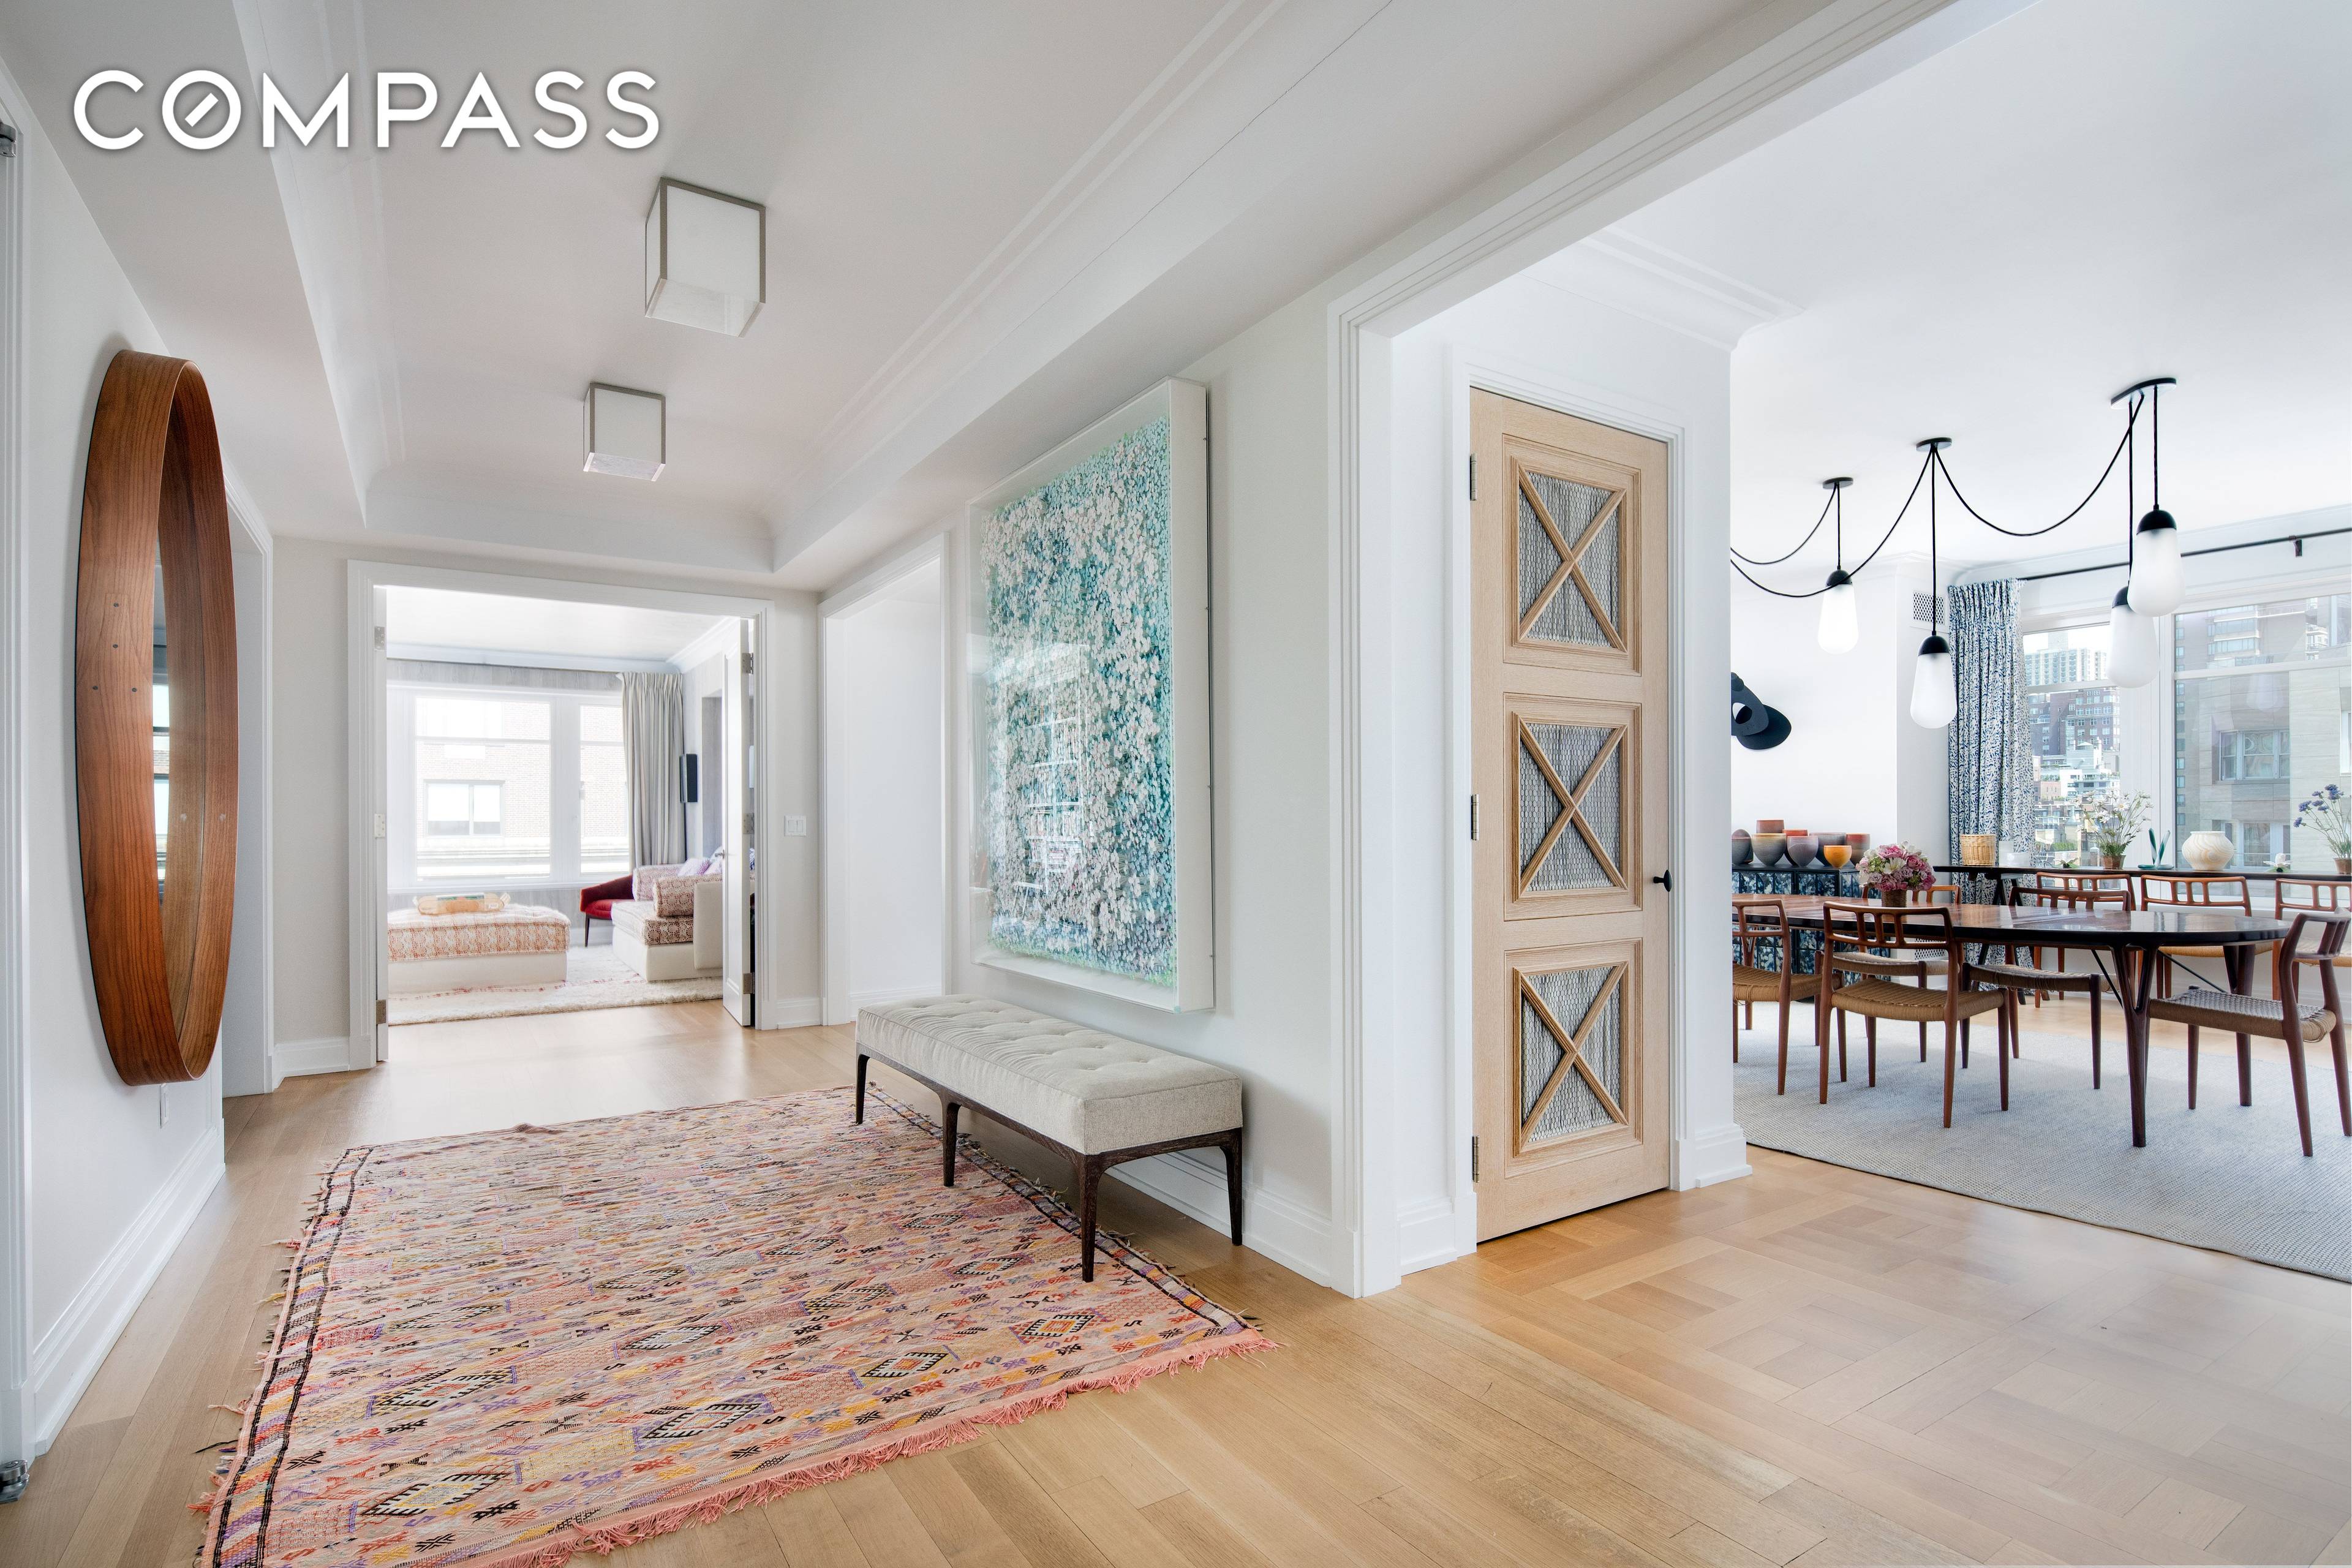 Situated within one of the Upper East Side's most esteemed condominiums, this expansive 4, 162 square foot A line home at 200 East 79th Street embodies the essence of elegance.